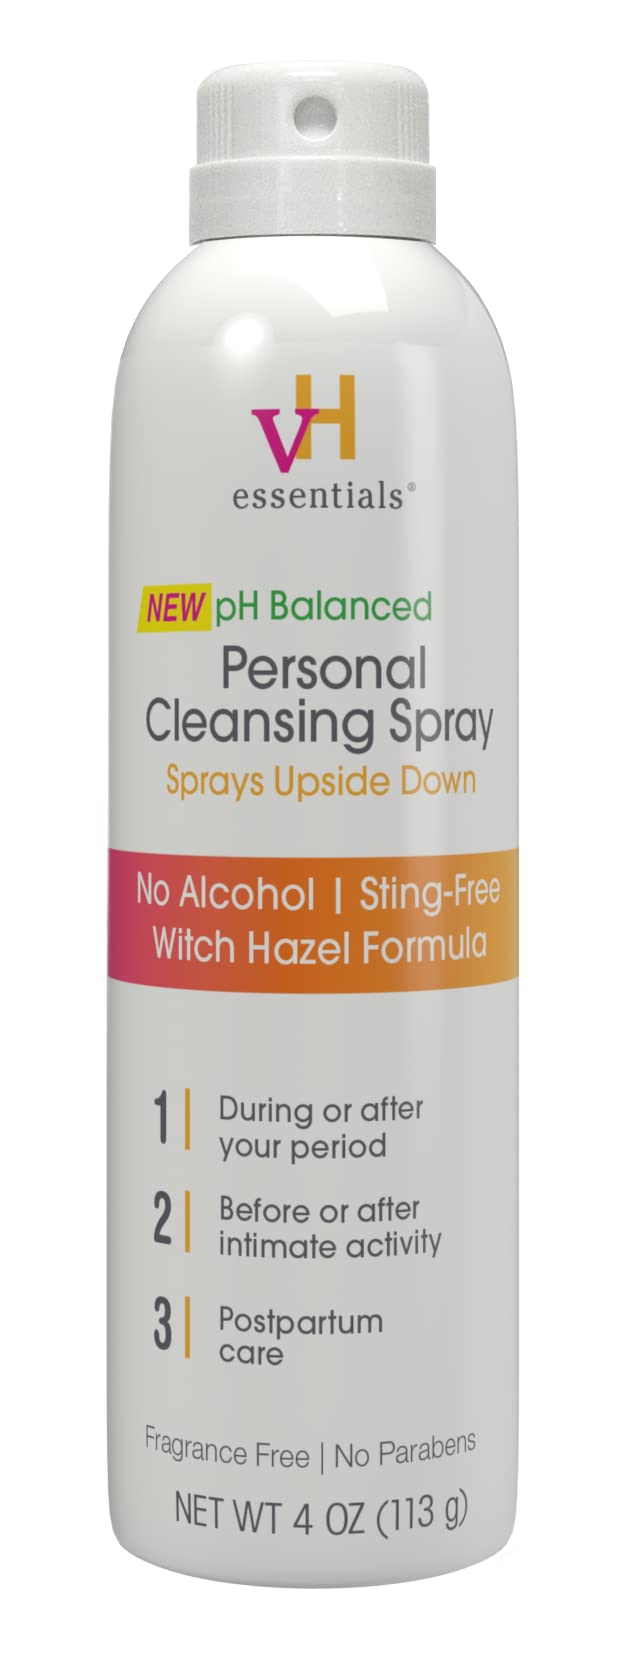 vH essentials Personal Cleansing Spray, pH Balancing Lactic Acid, Sting-Free, Witch Hazel Formula, Fragrance free, Paraben free, Sprays upside down for easy external intimate cleansing, 4 floz